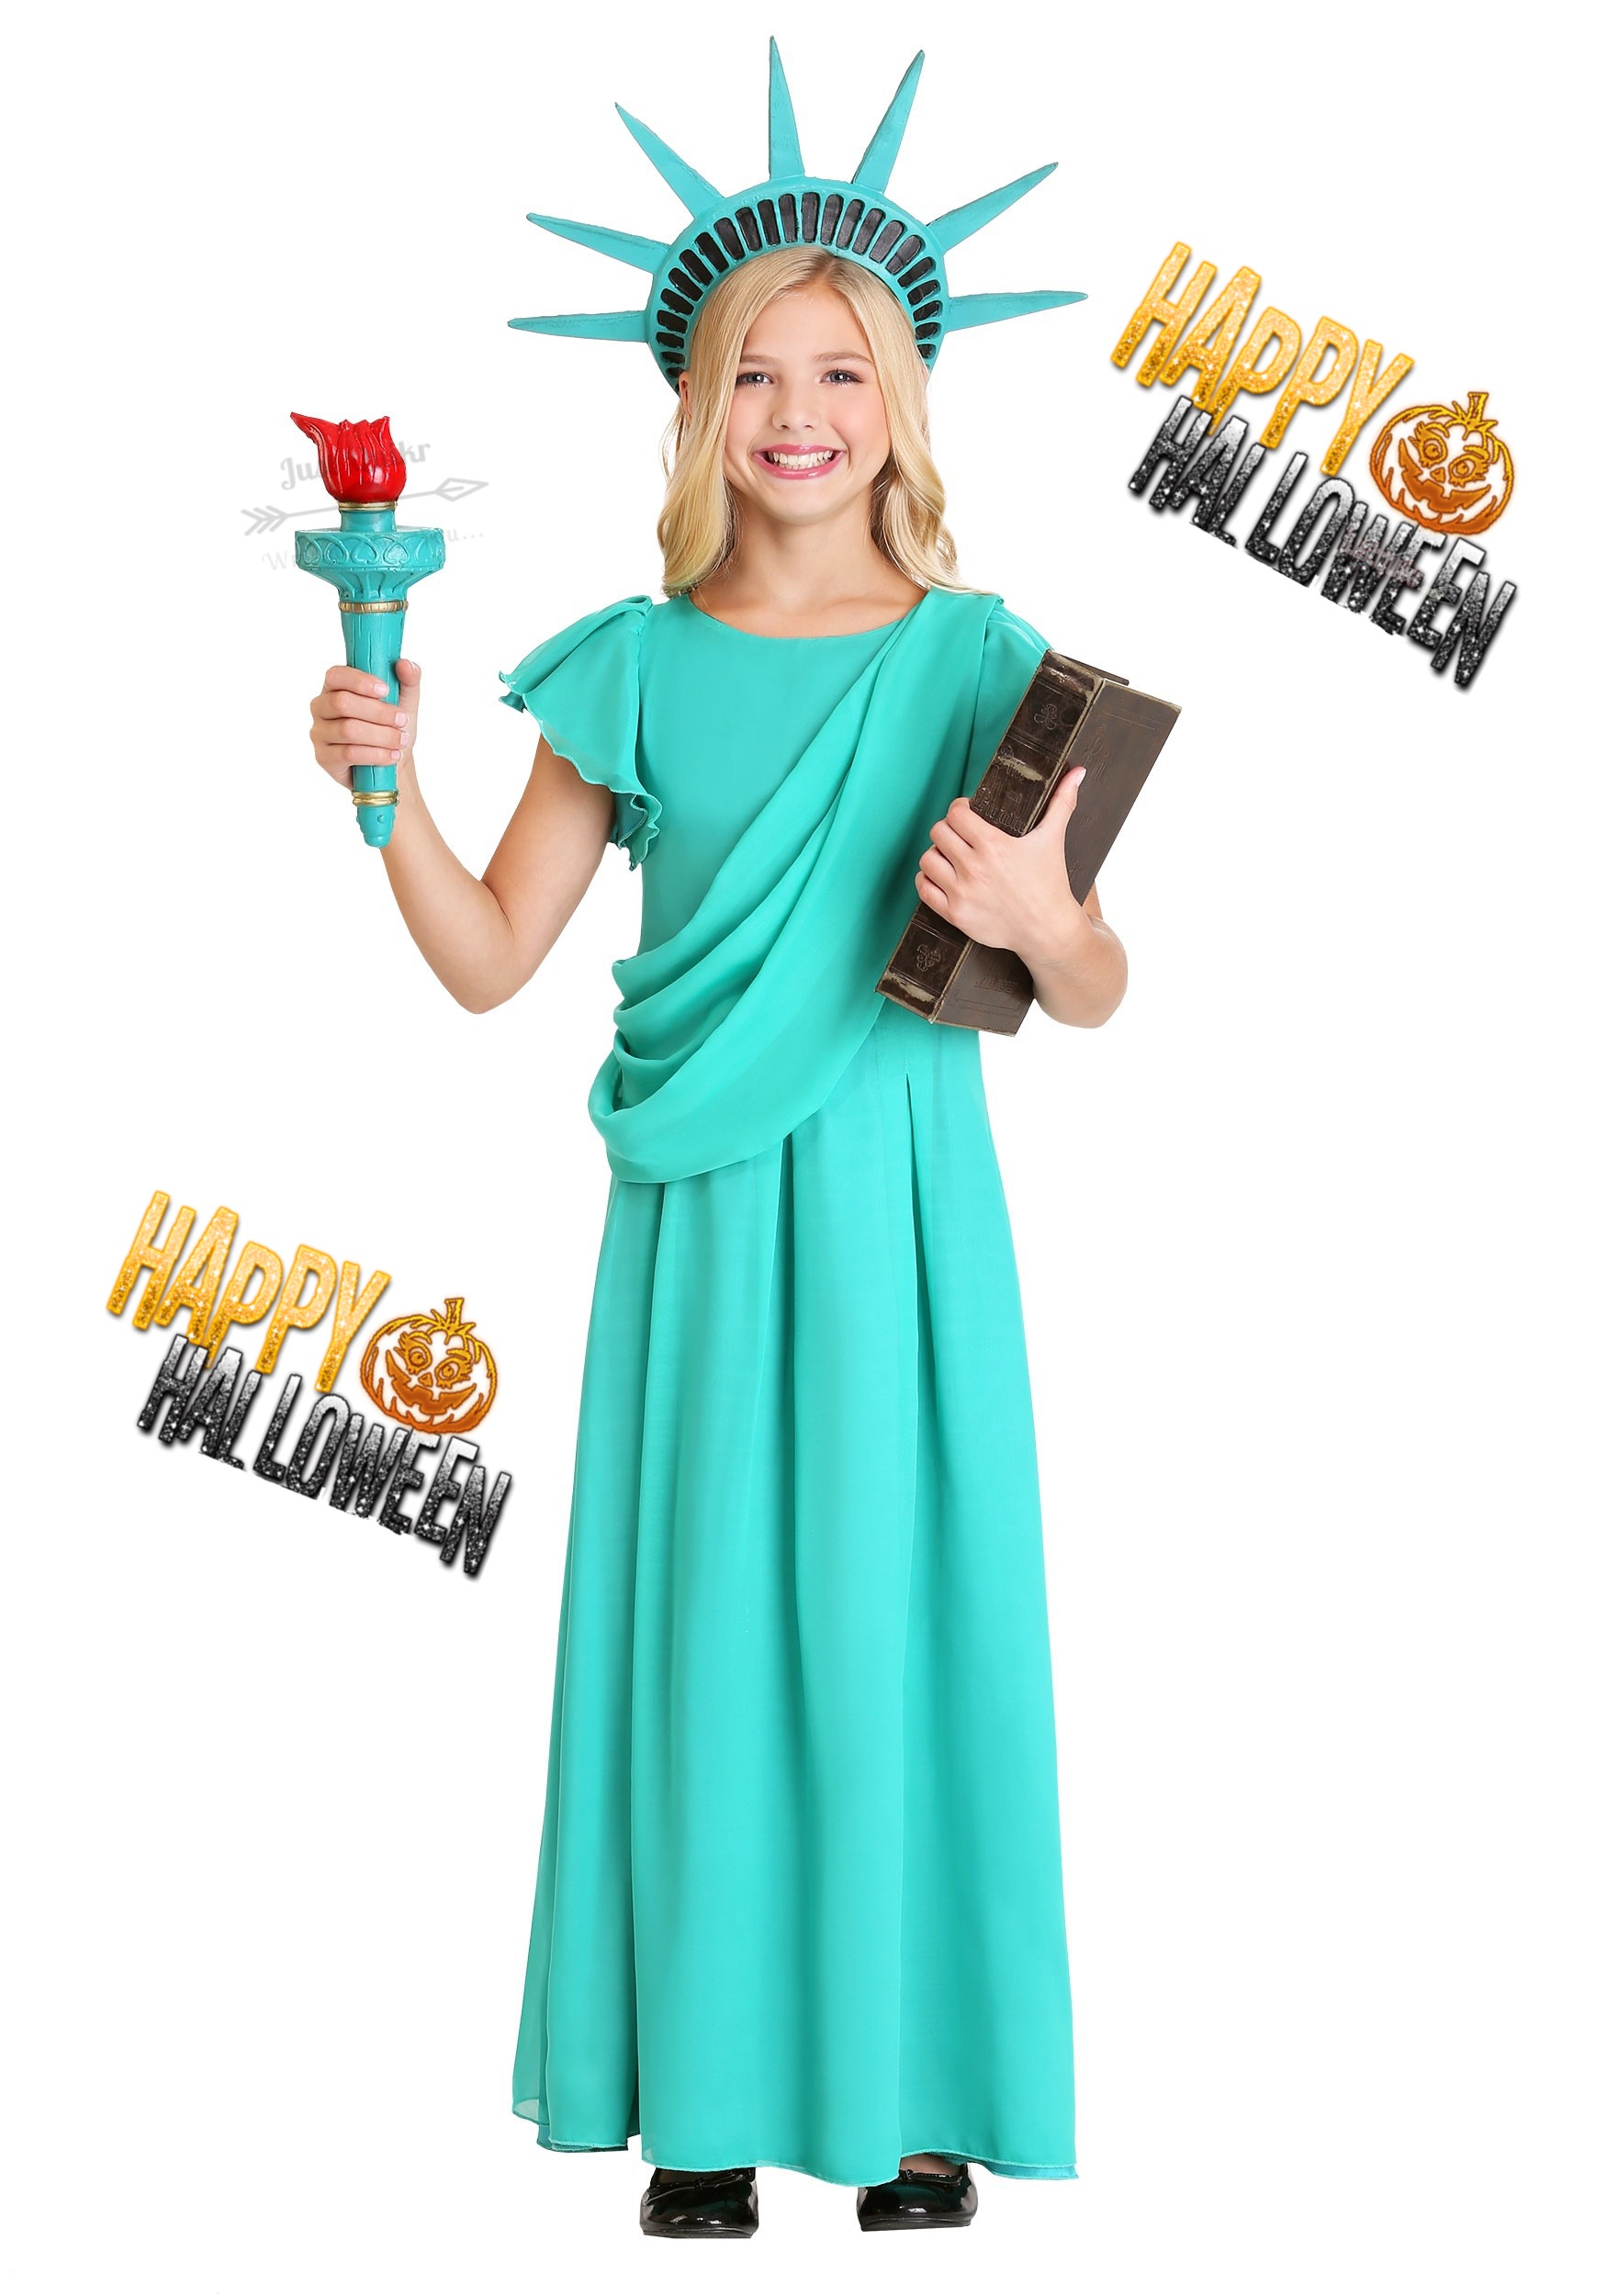 Halloween Day Dress Ideas for School Students 